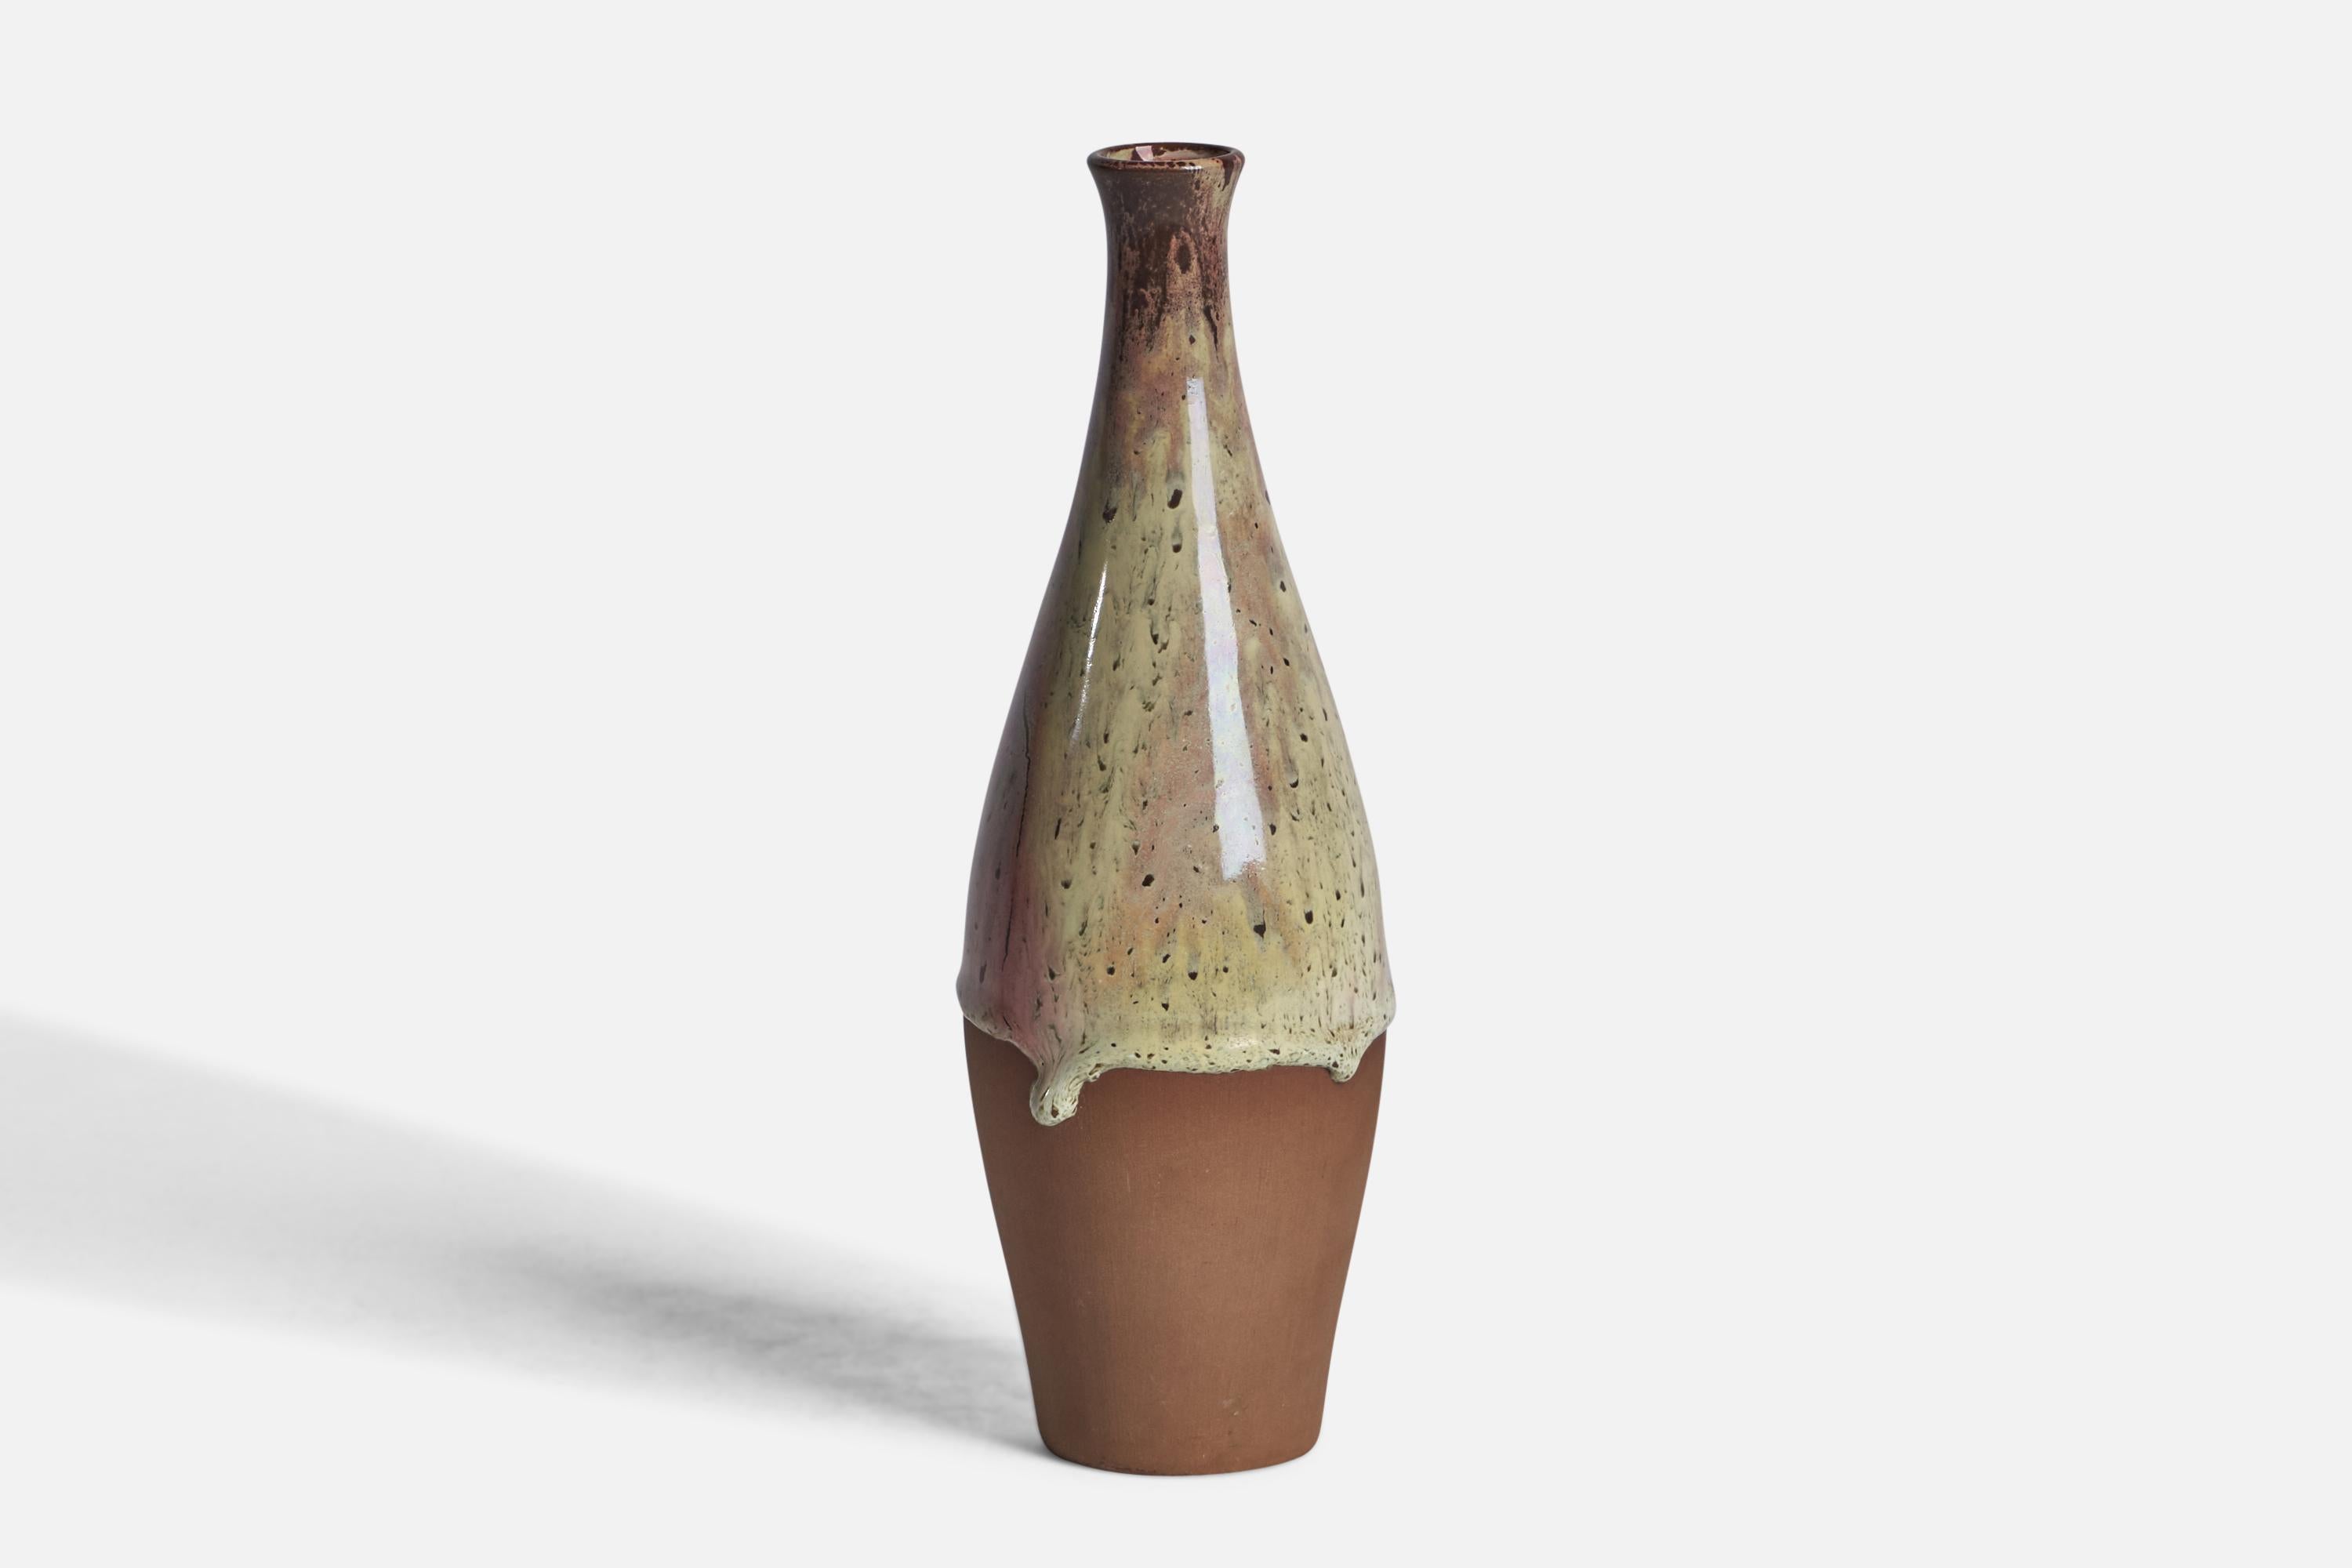 A small semi grey-glazed stoneware vase designed and produced by Sven Hofverberg, Sweden, c. 1970s.

“SH” signature on bottom